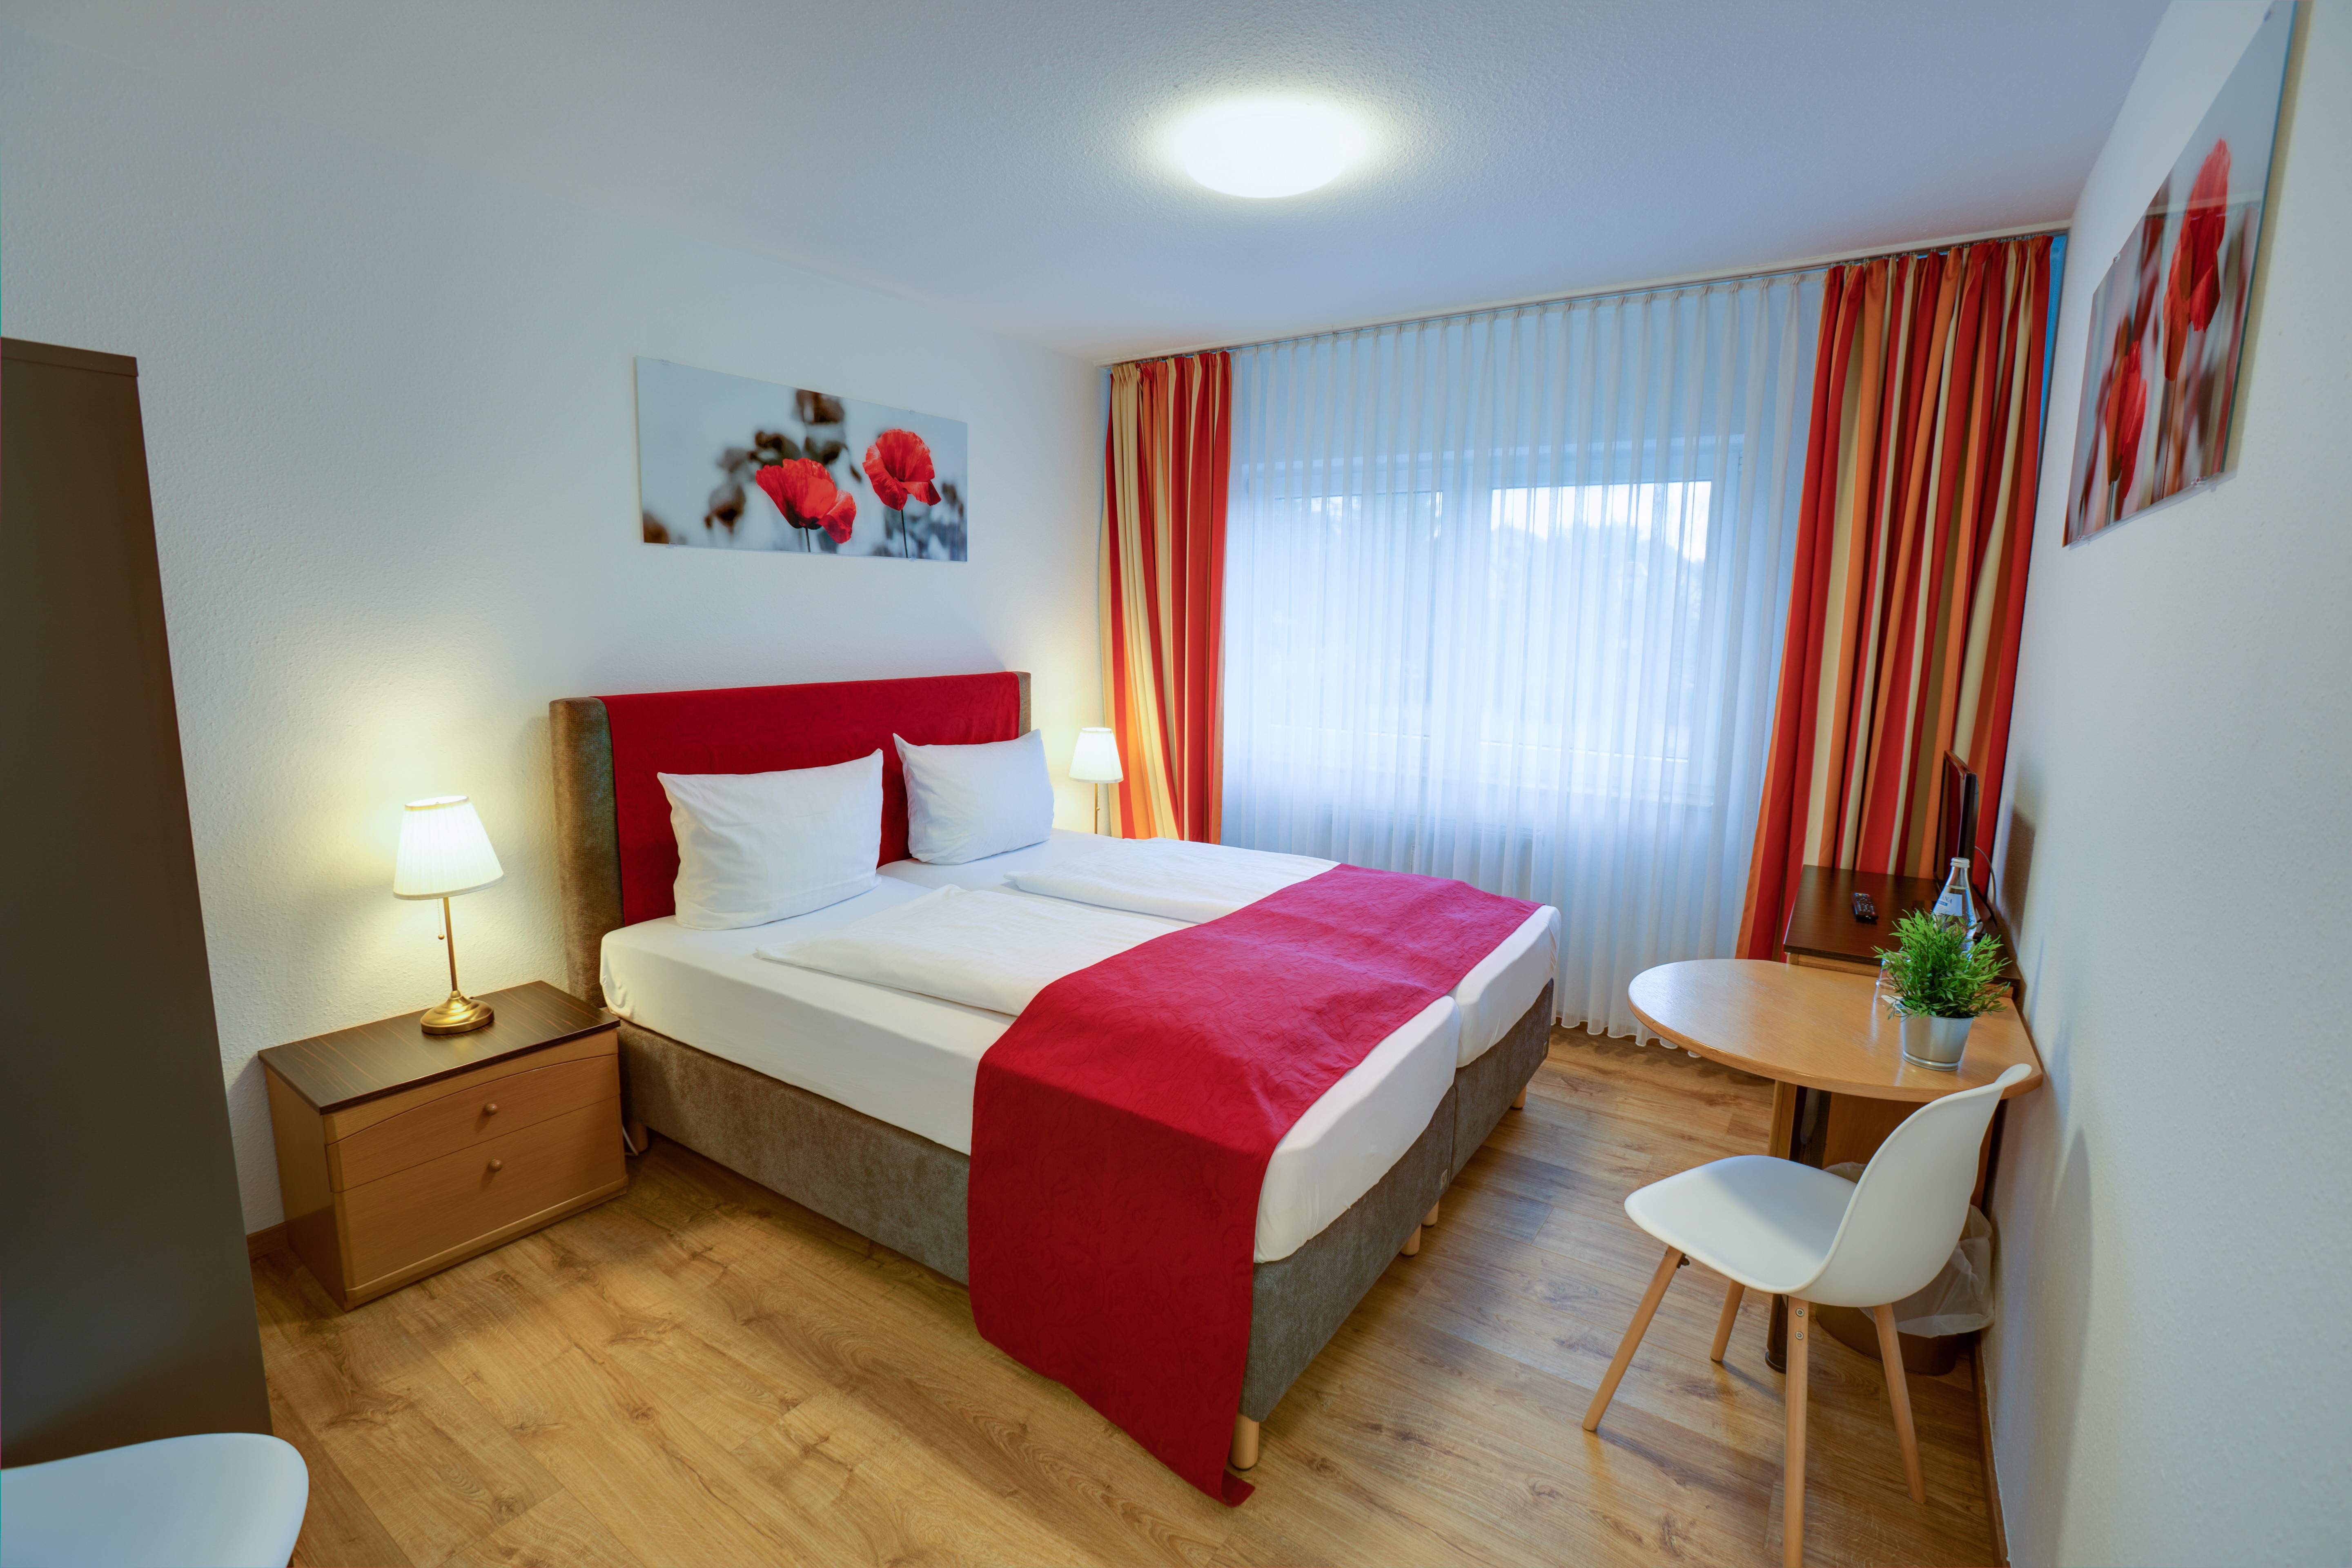 Hotel Leo Mühlhausen <br/>89.00 ew <br/> <a href='http://vakantieoplossing.nl/outpage/?id=8a79ecc10267b61556239db6d0f1c272' target='_blank'>View Details</a>